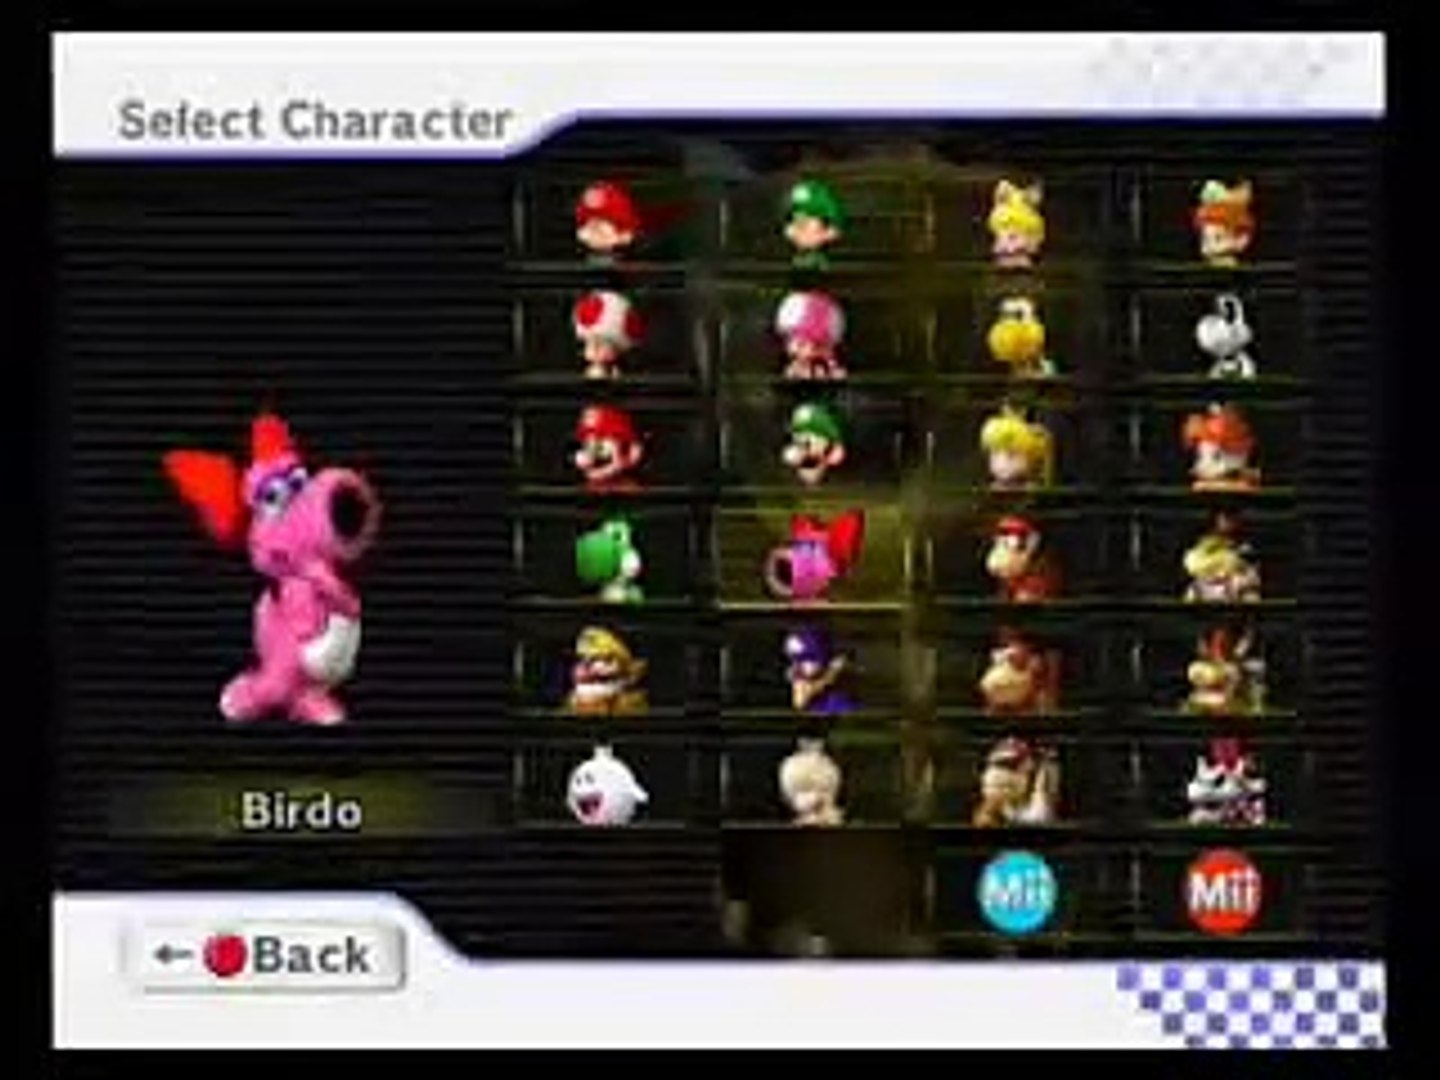 mario kart wii - all characters, bikes, cars - characters stats - video  Dailymotion